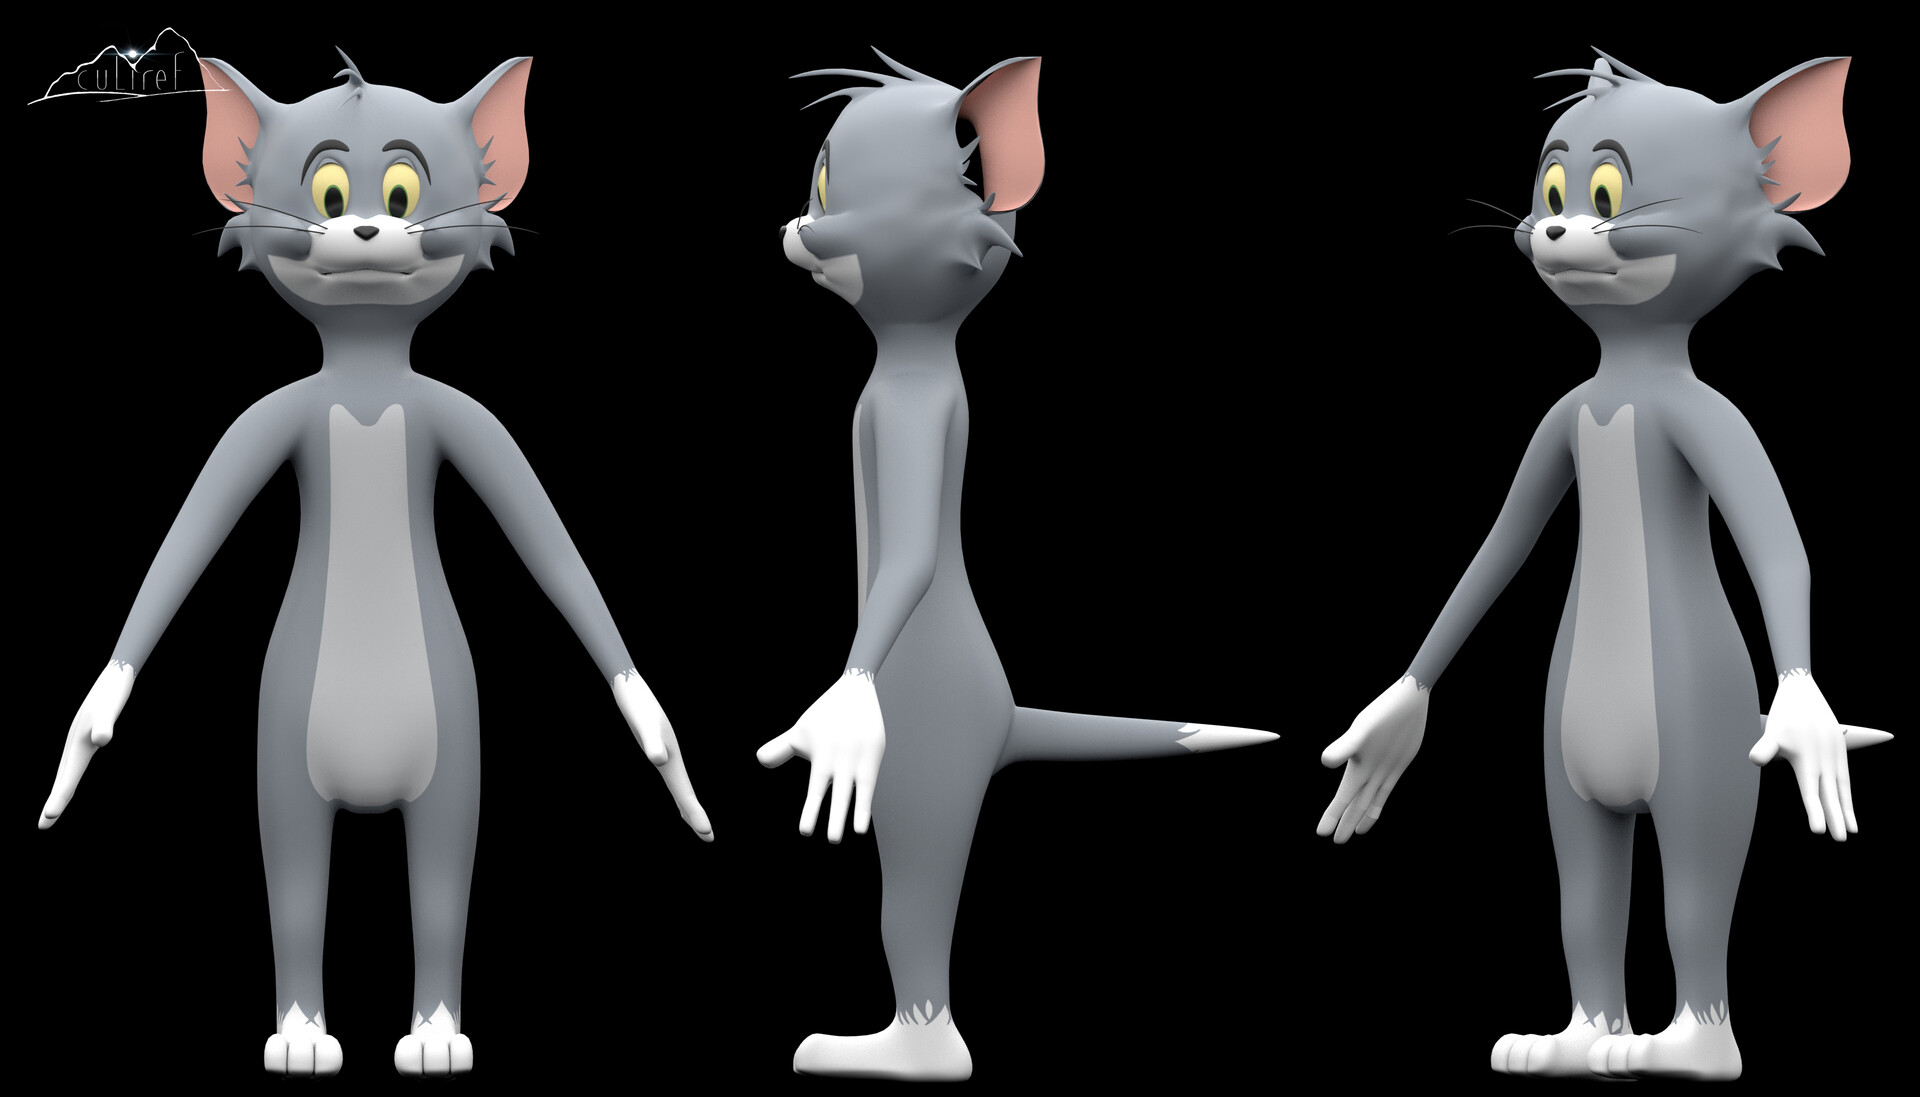 ArtStation - Tom and Jerry Cartoon 3D Reference Images